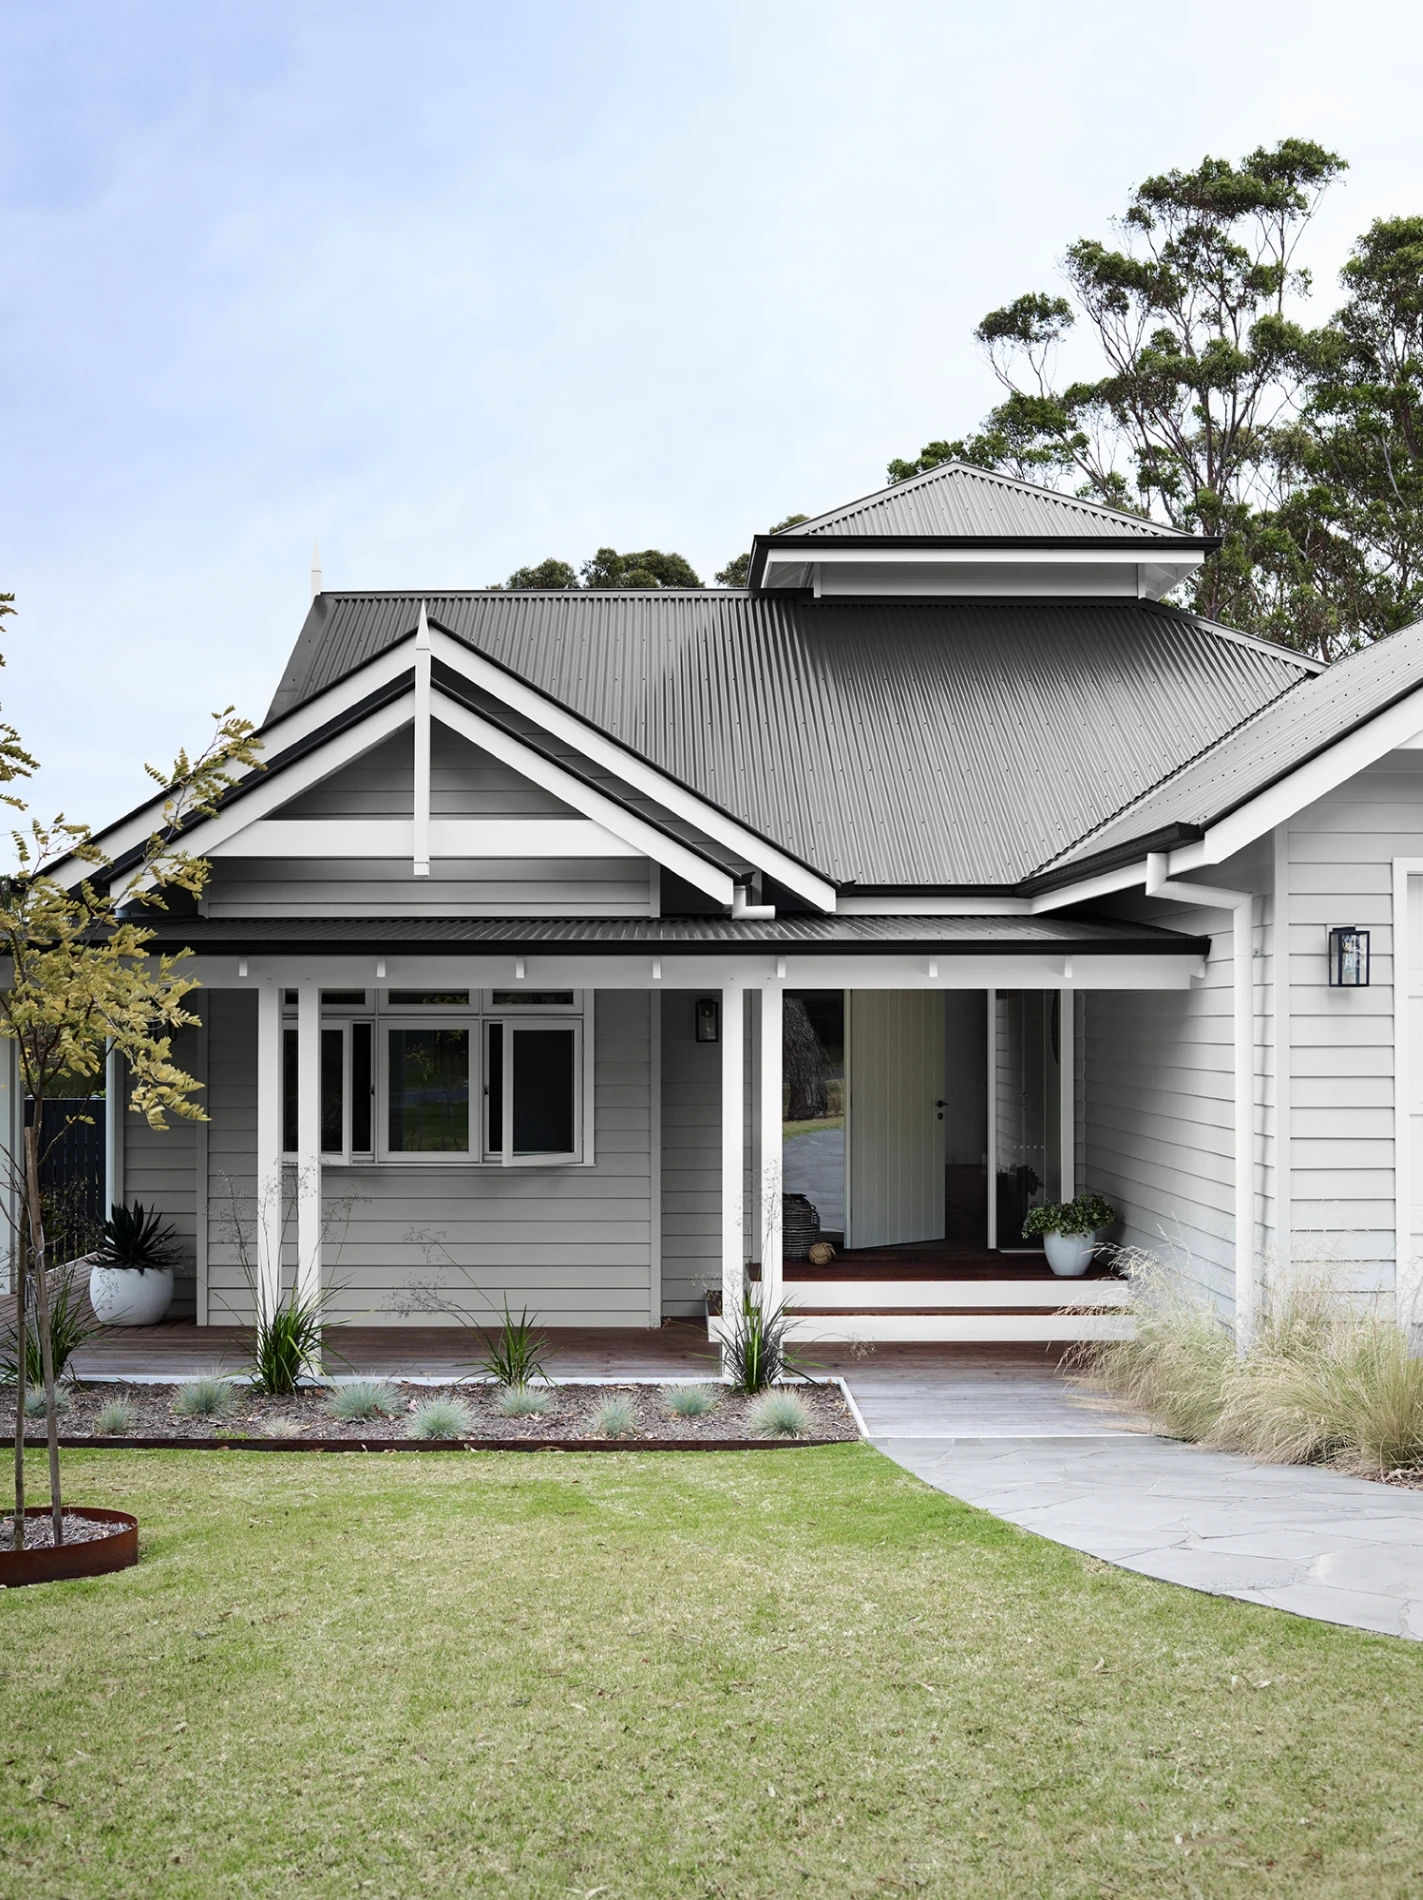 Colorbond® Monument® is a dark charcoal suitable for any exterior and works well with contemporary and modern homes.